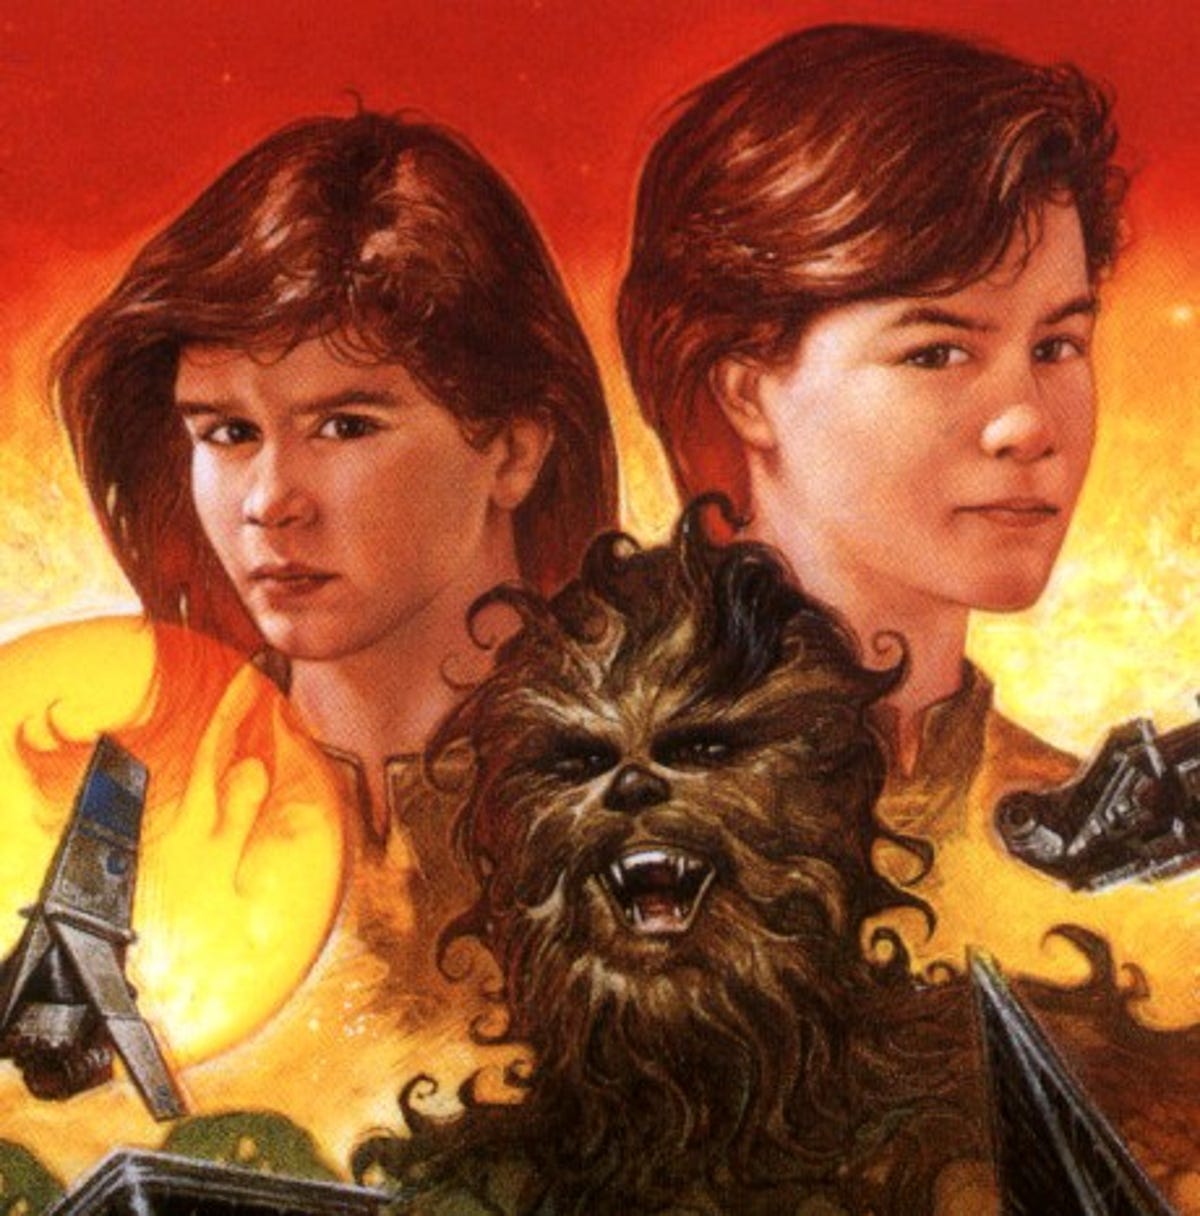 Han and Leia's twin children, Jacen and Jaina Solo, have adventures with Chewbacca's nephew Lowie in the Expanded Universe "Young Jedi Knights" book series.